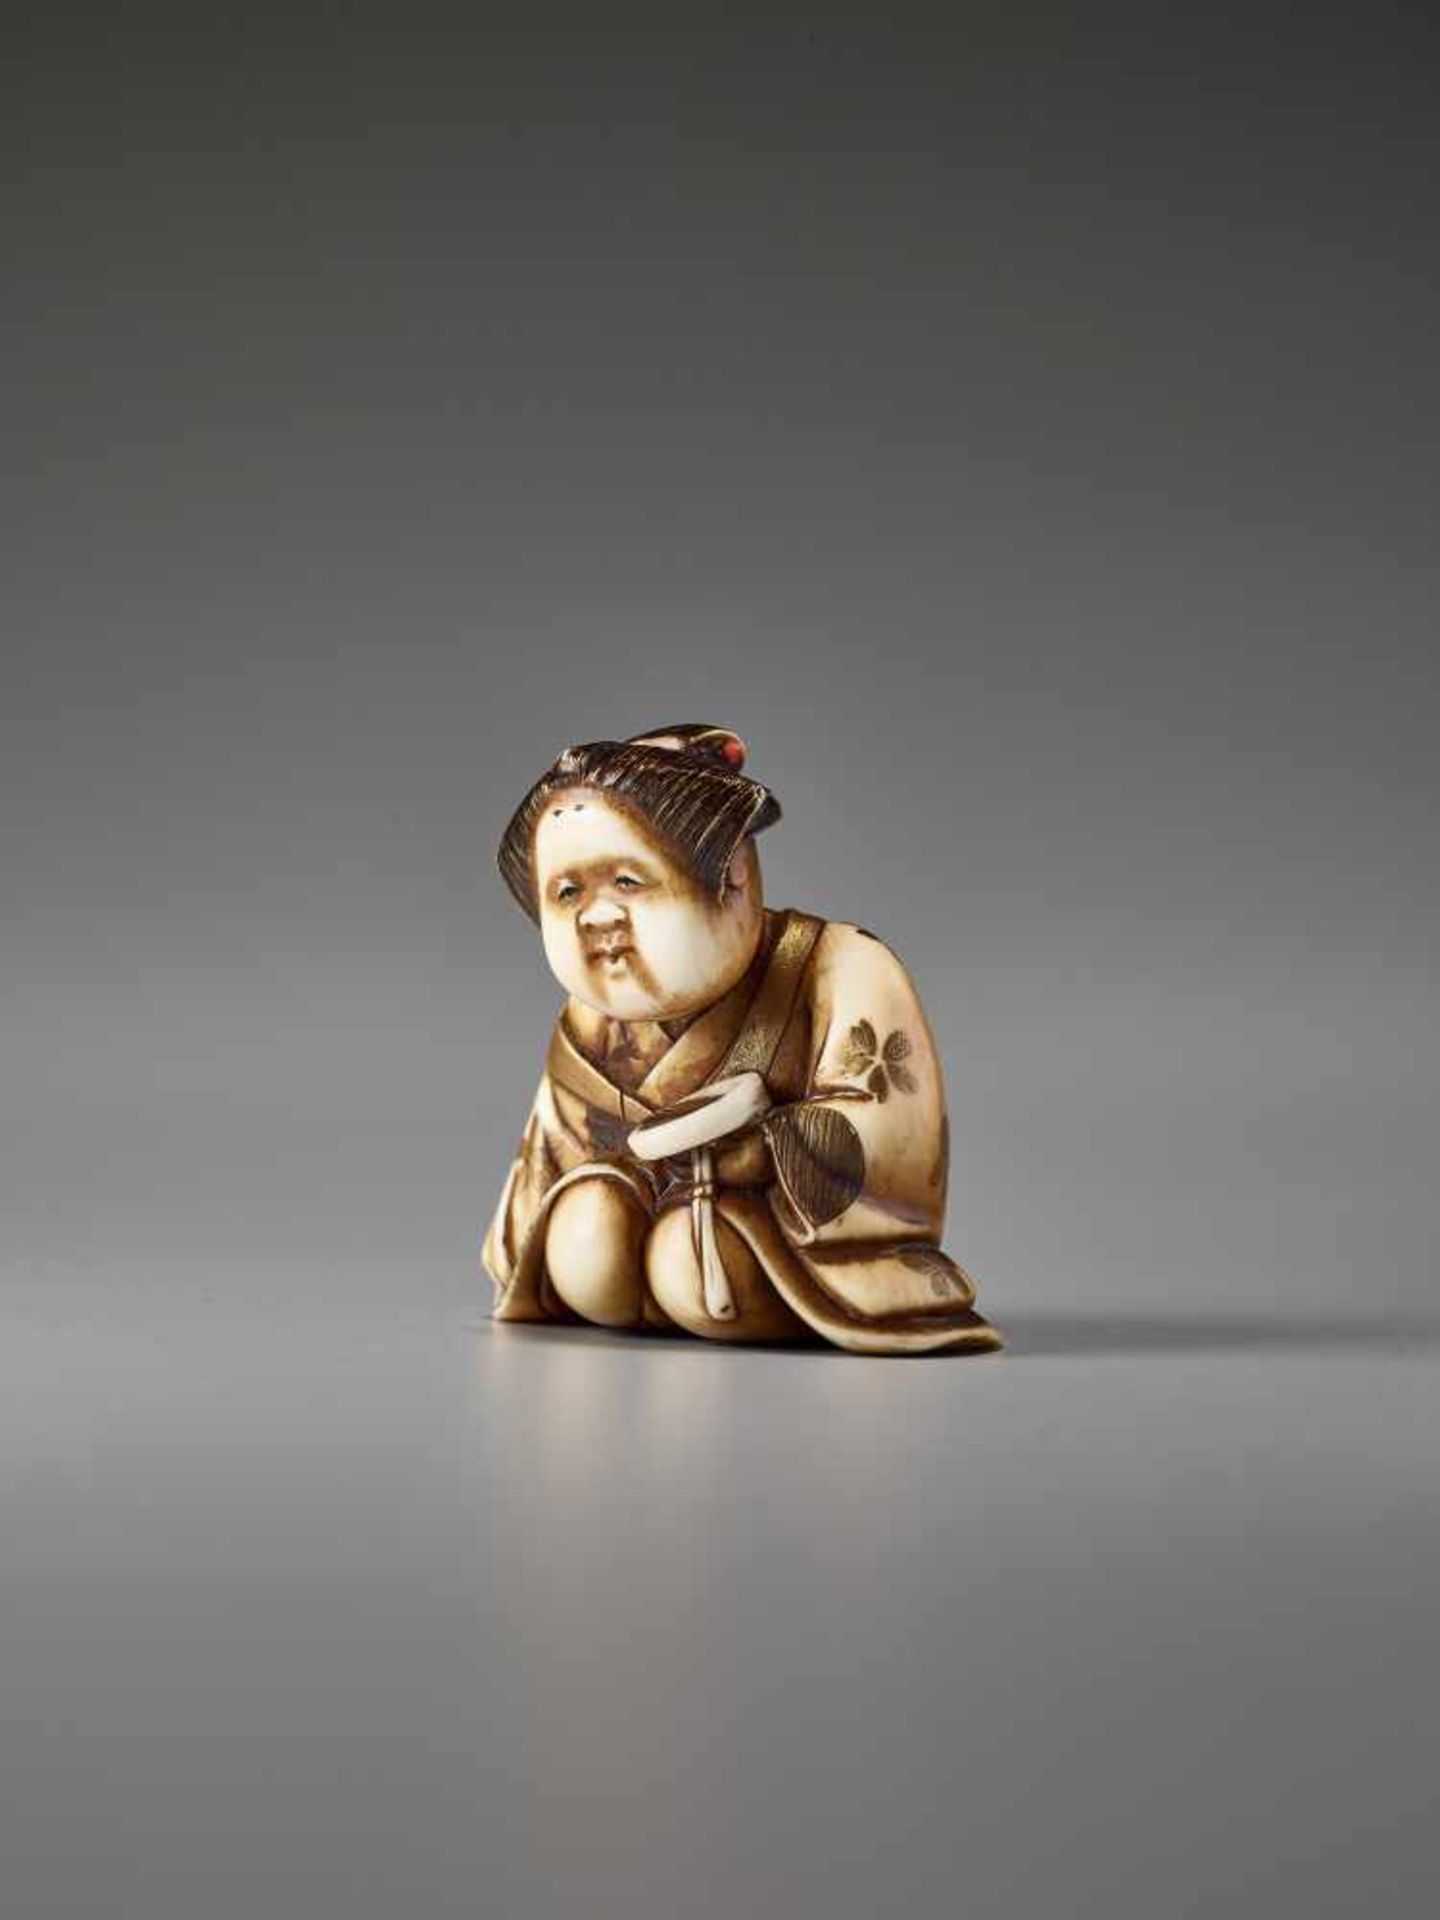 AN IVORY AND LACQUER NETSUKE OF OKAME WITH A SAKE CUP BY KEIMIN By Keimin, ivory netsuke with gold - Image 3 of 7